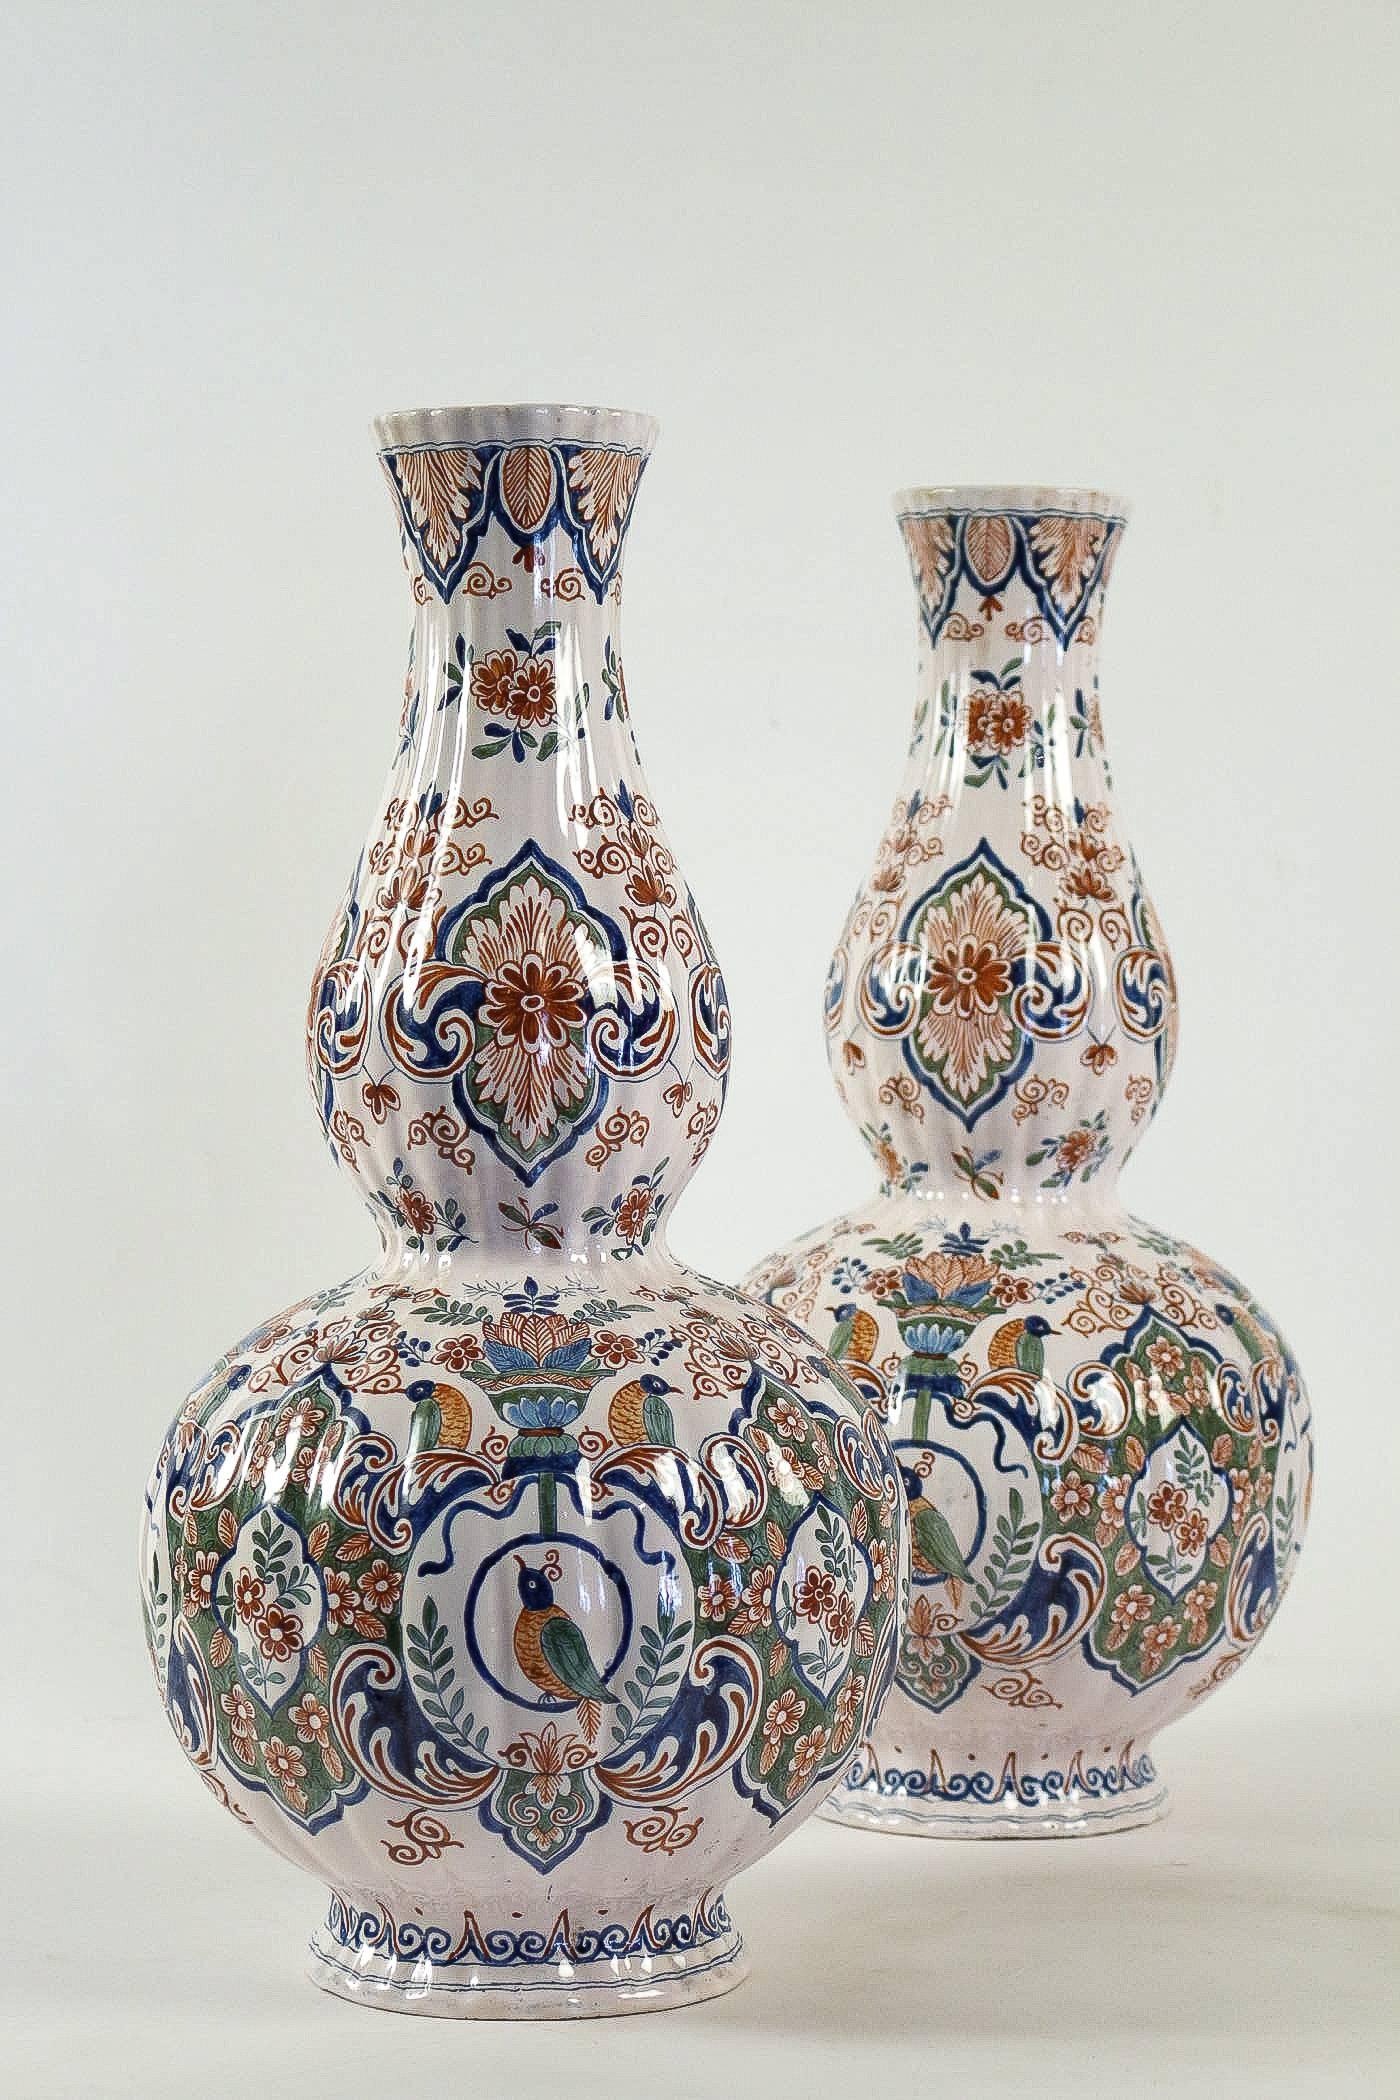 Dutch Early-18th Century, Polychrome Delft Faience Pair of Gourd-Shaped Vases 8